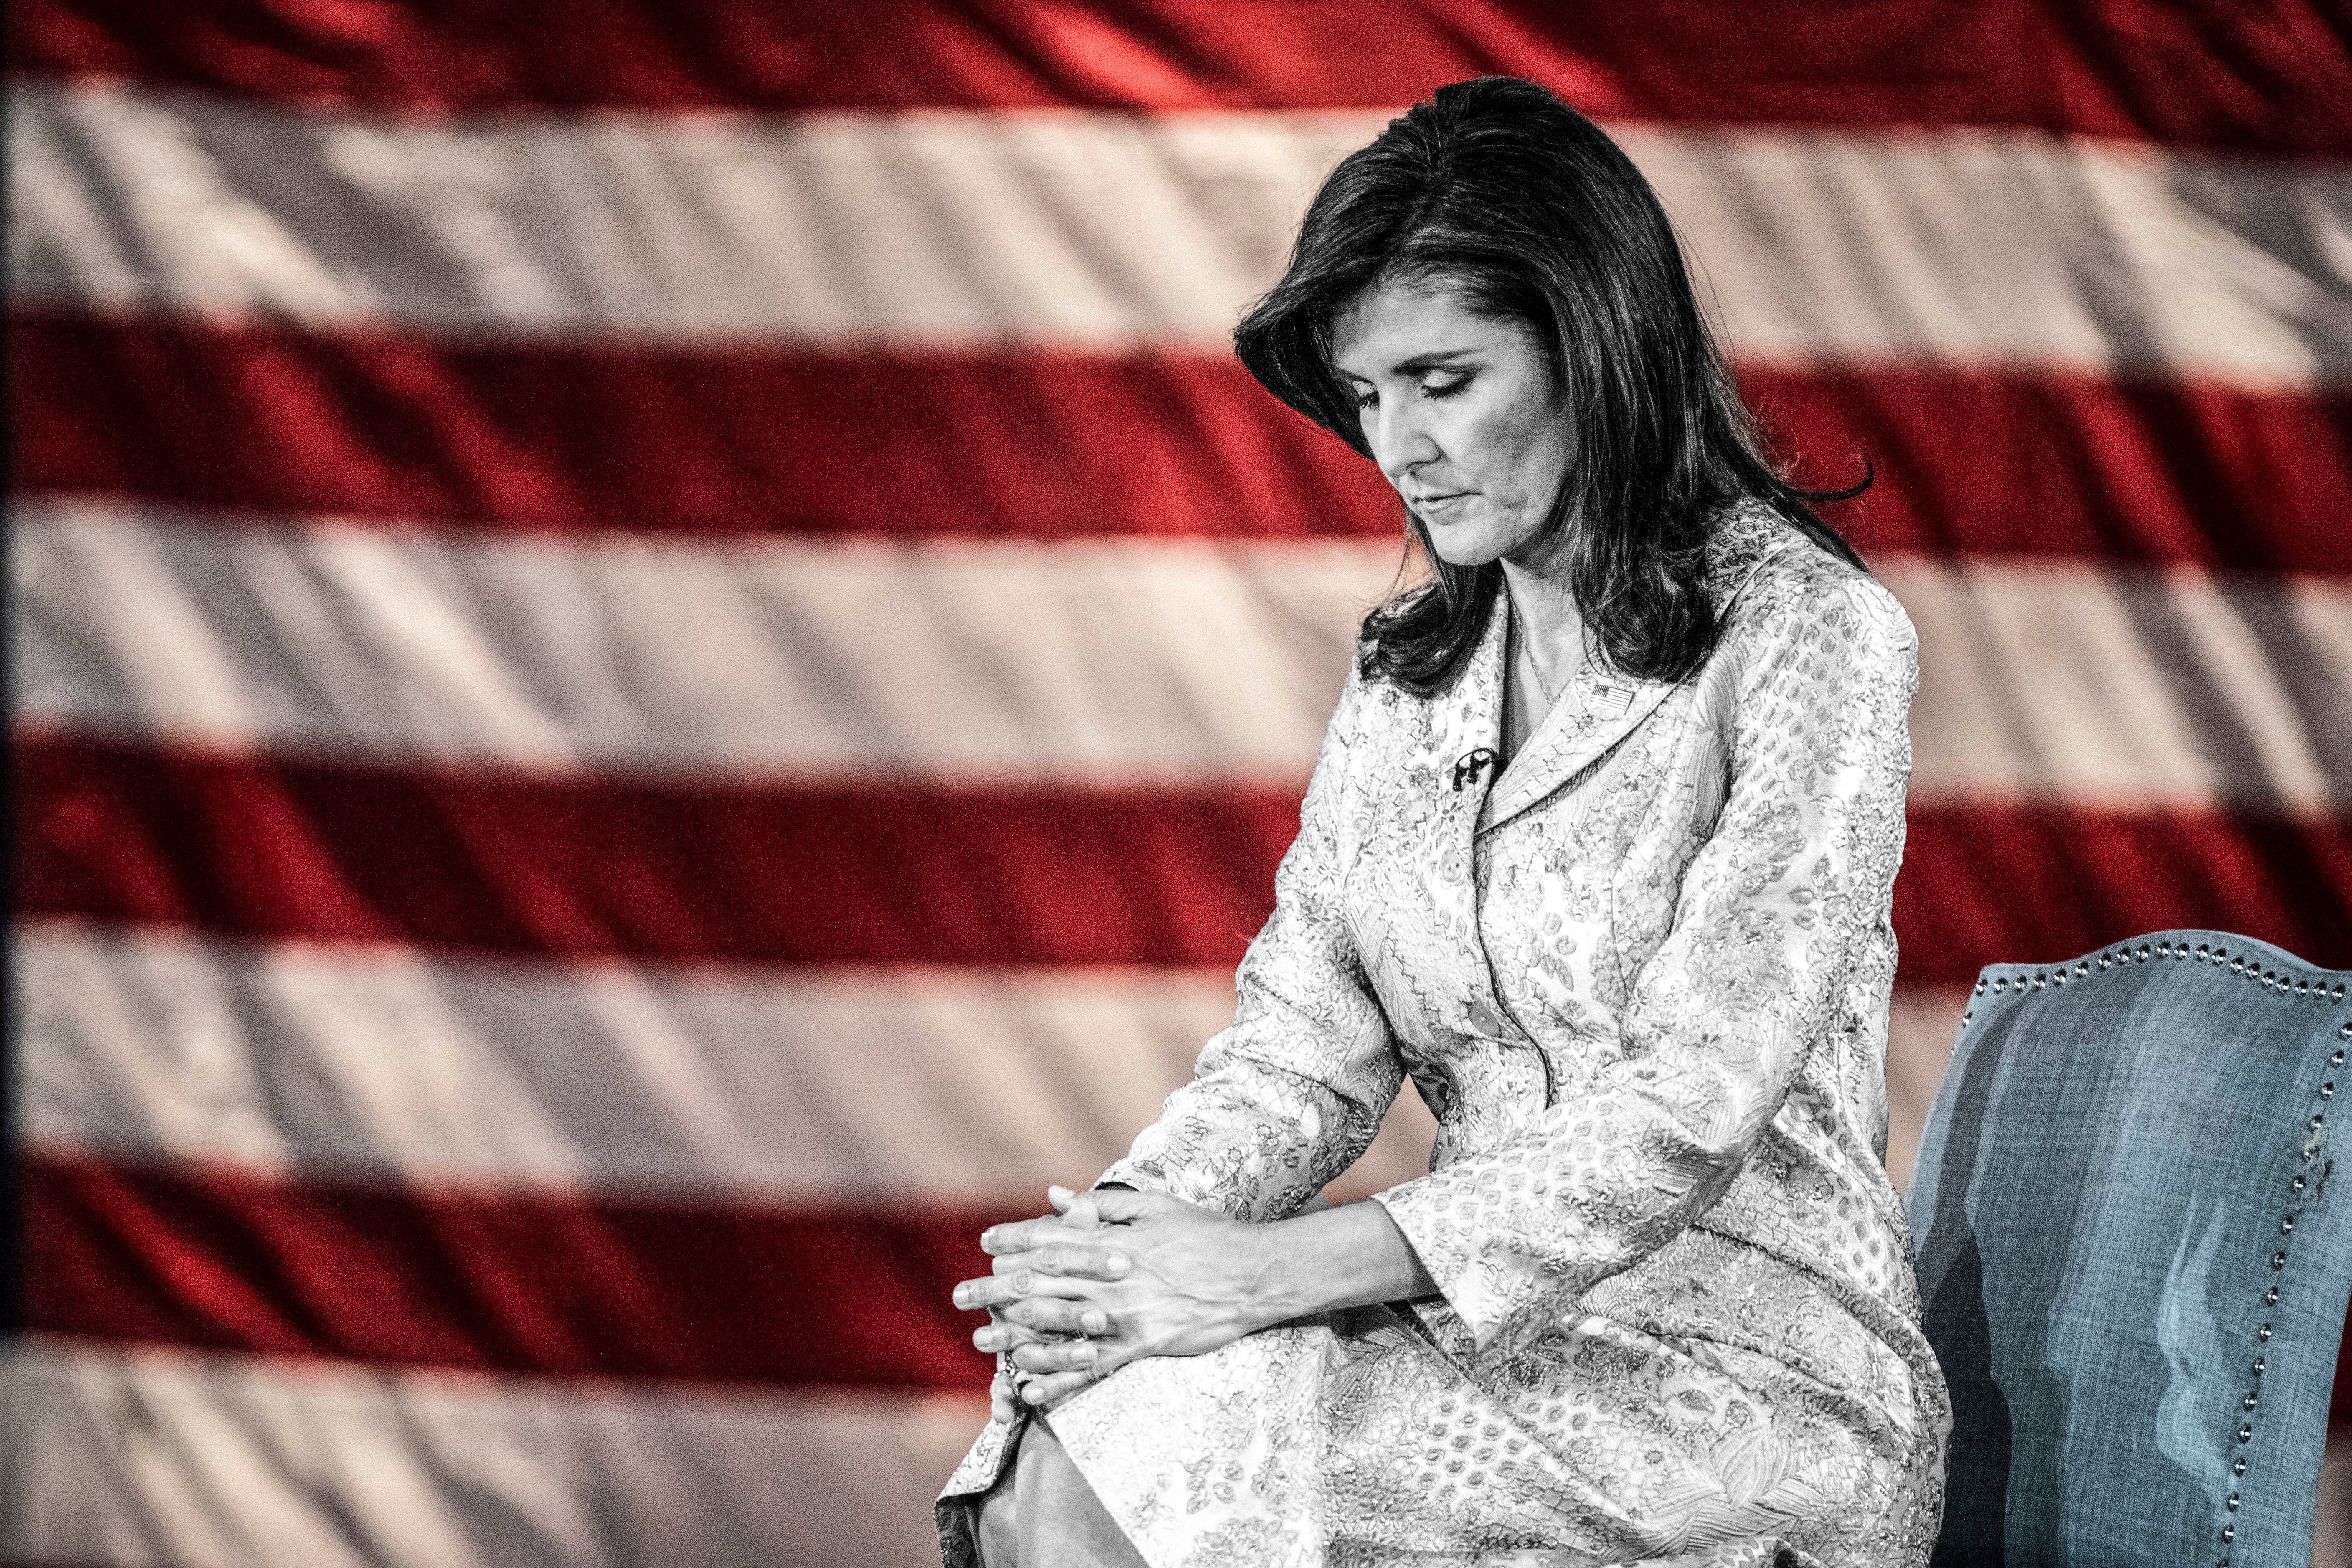 Nikki Haley suspended her campaign on Wednesday